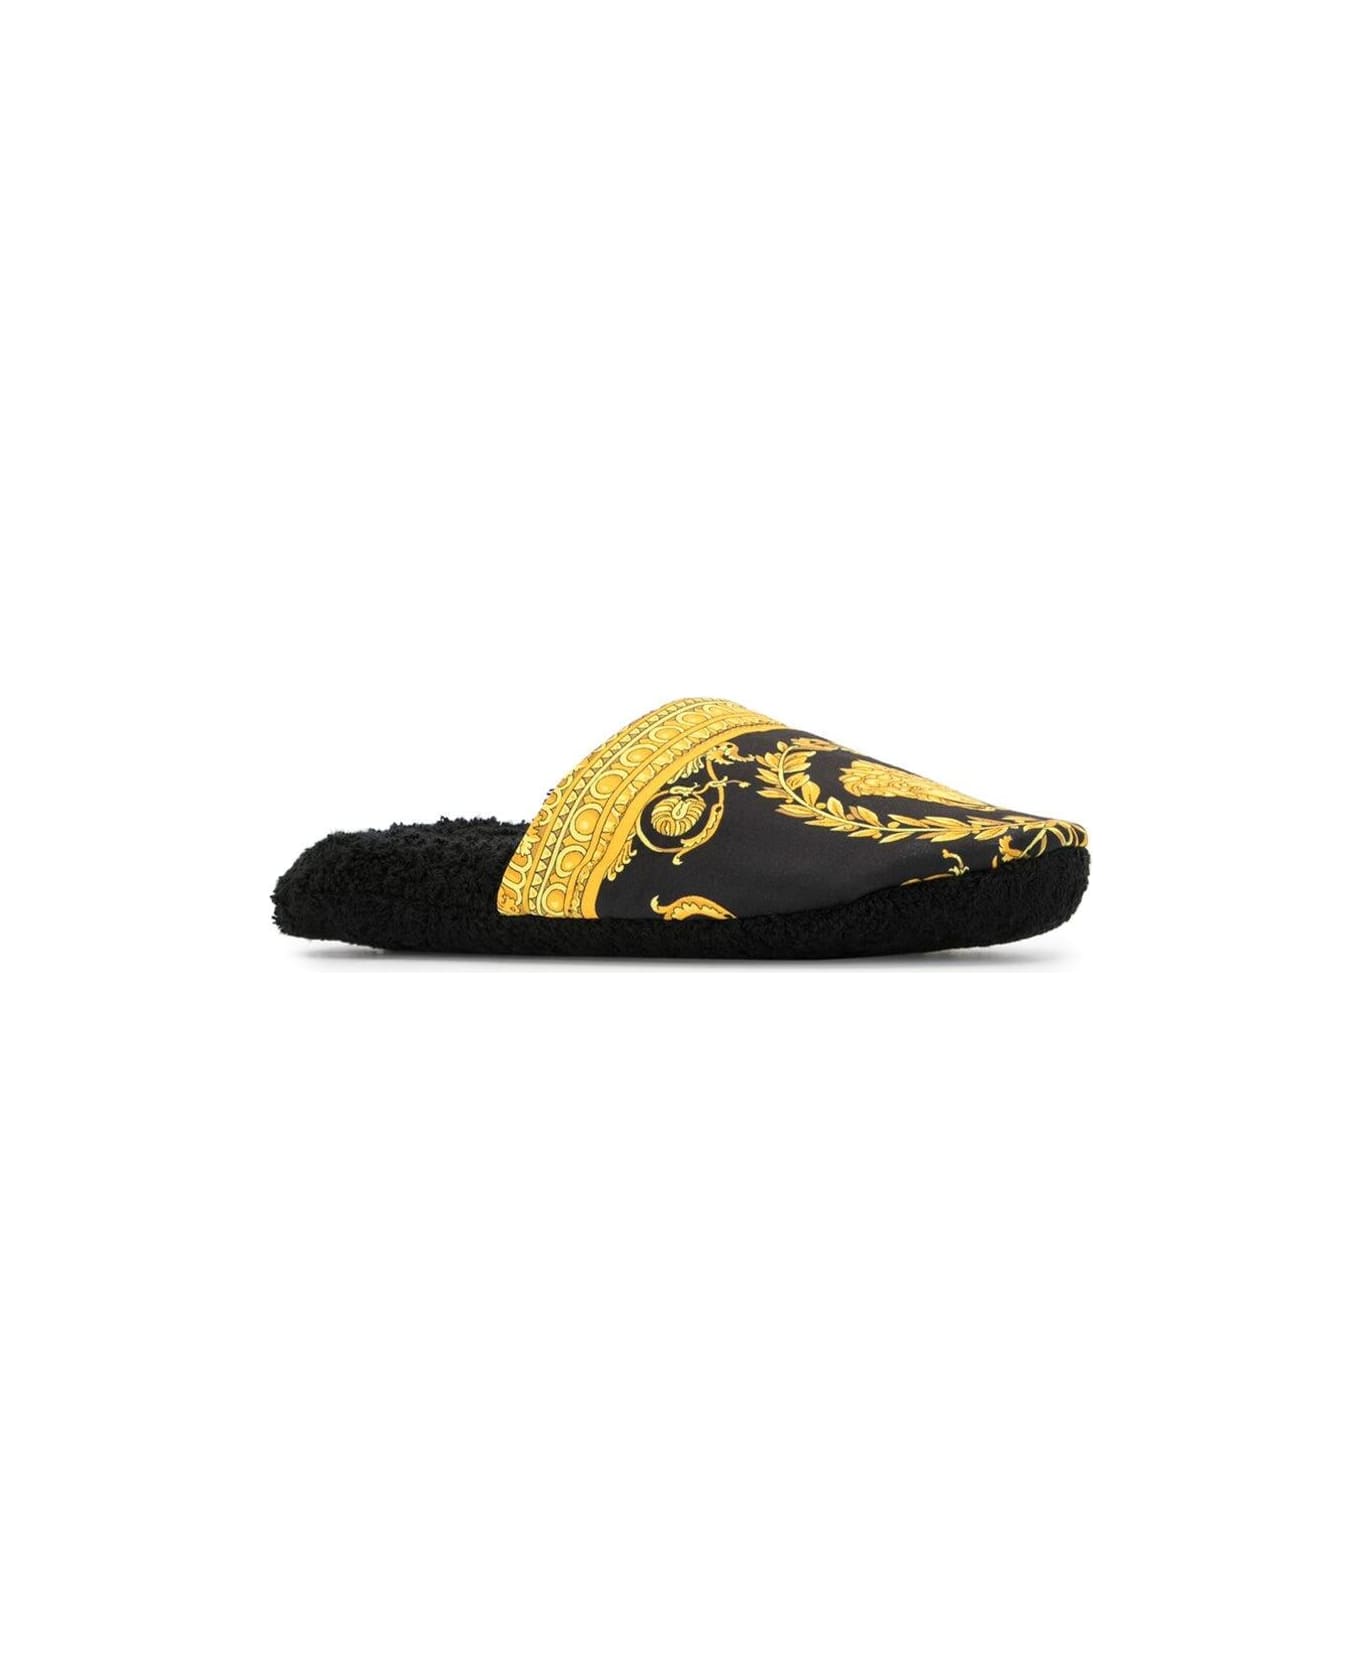 Versace Black And Gold House Slippers In Cotton And Terry With Baroque Print - Nero